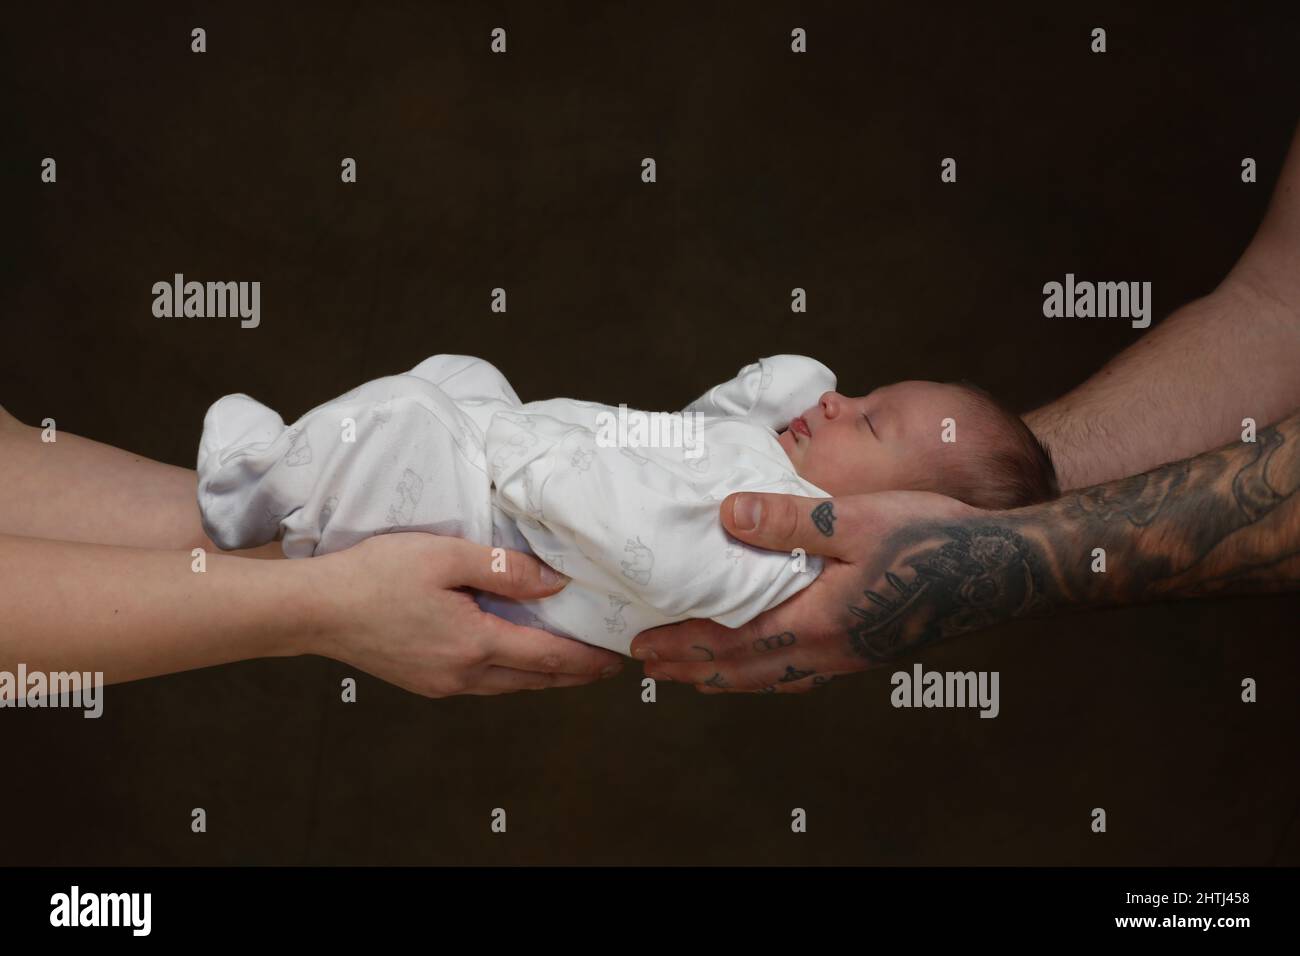 New born baby held safely by her parents strong secure hands. Stock Photo